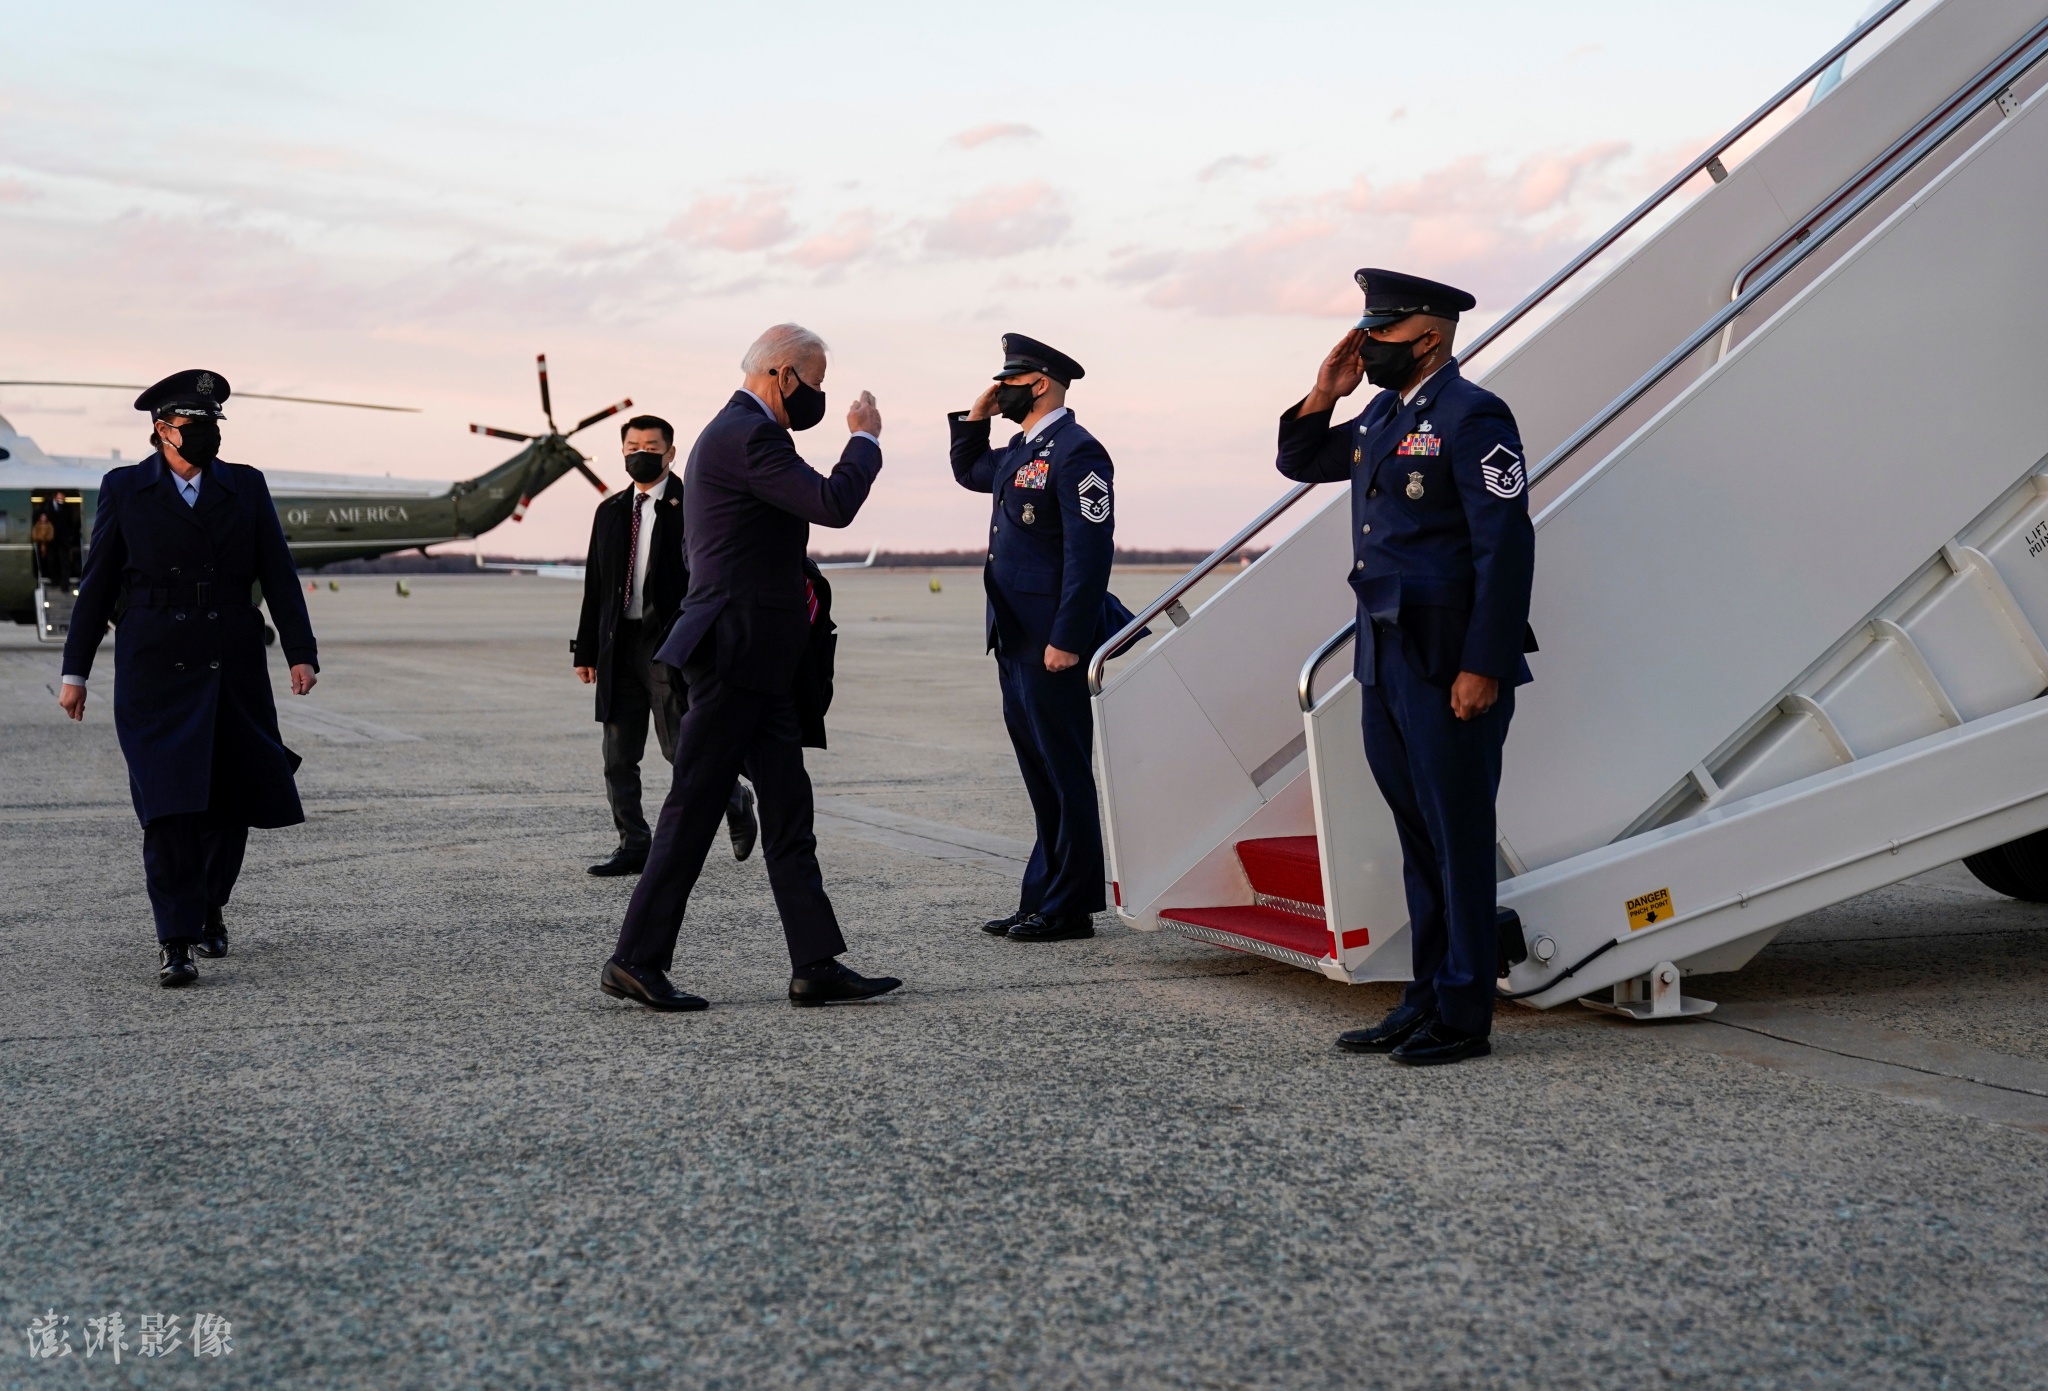 Biden almost trips up Air Force One stairs, avoids falling this time